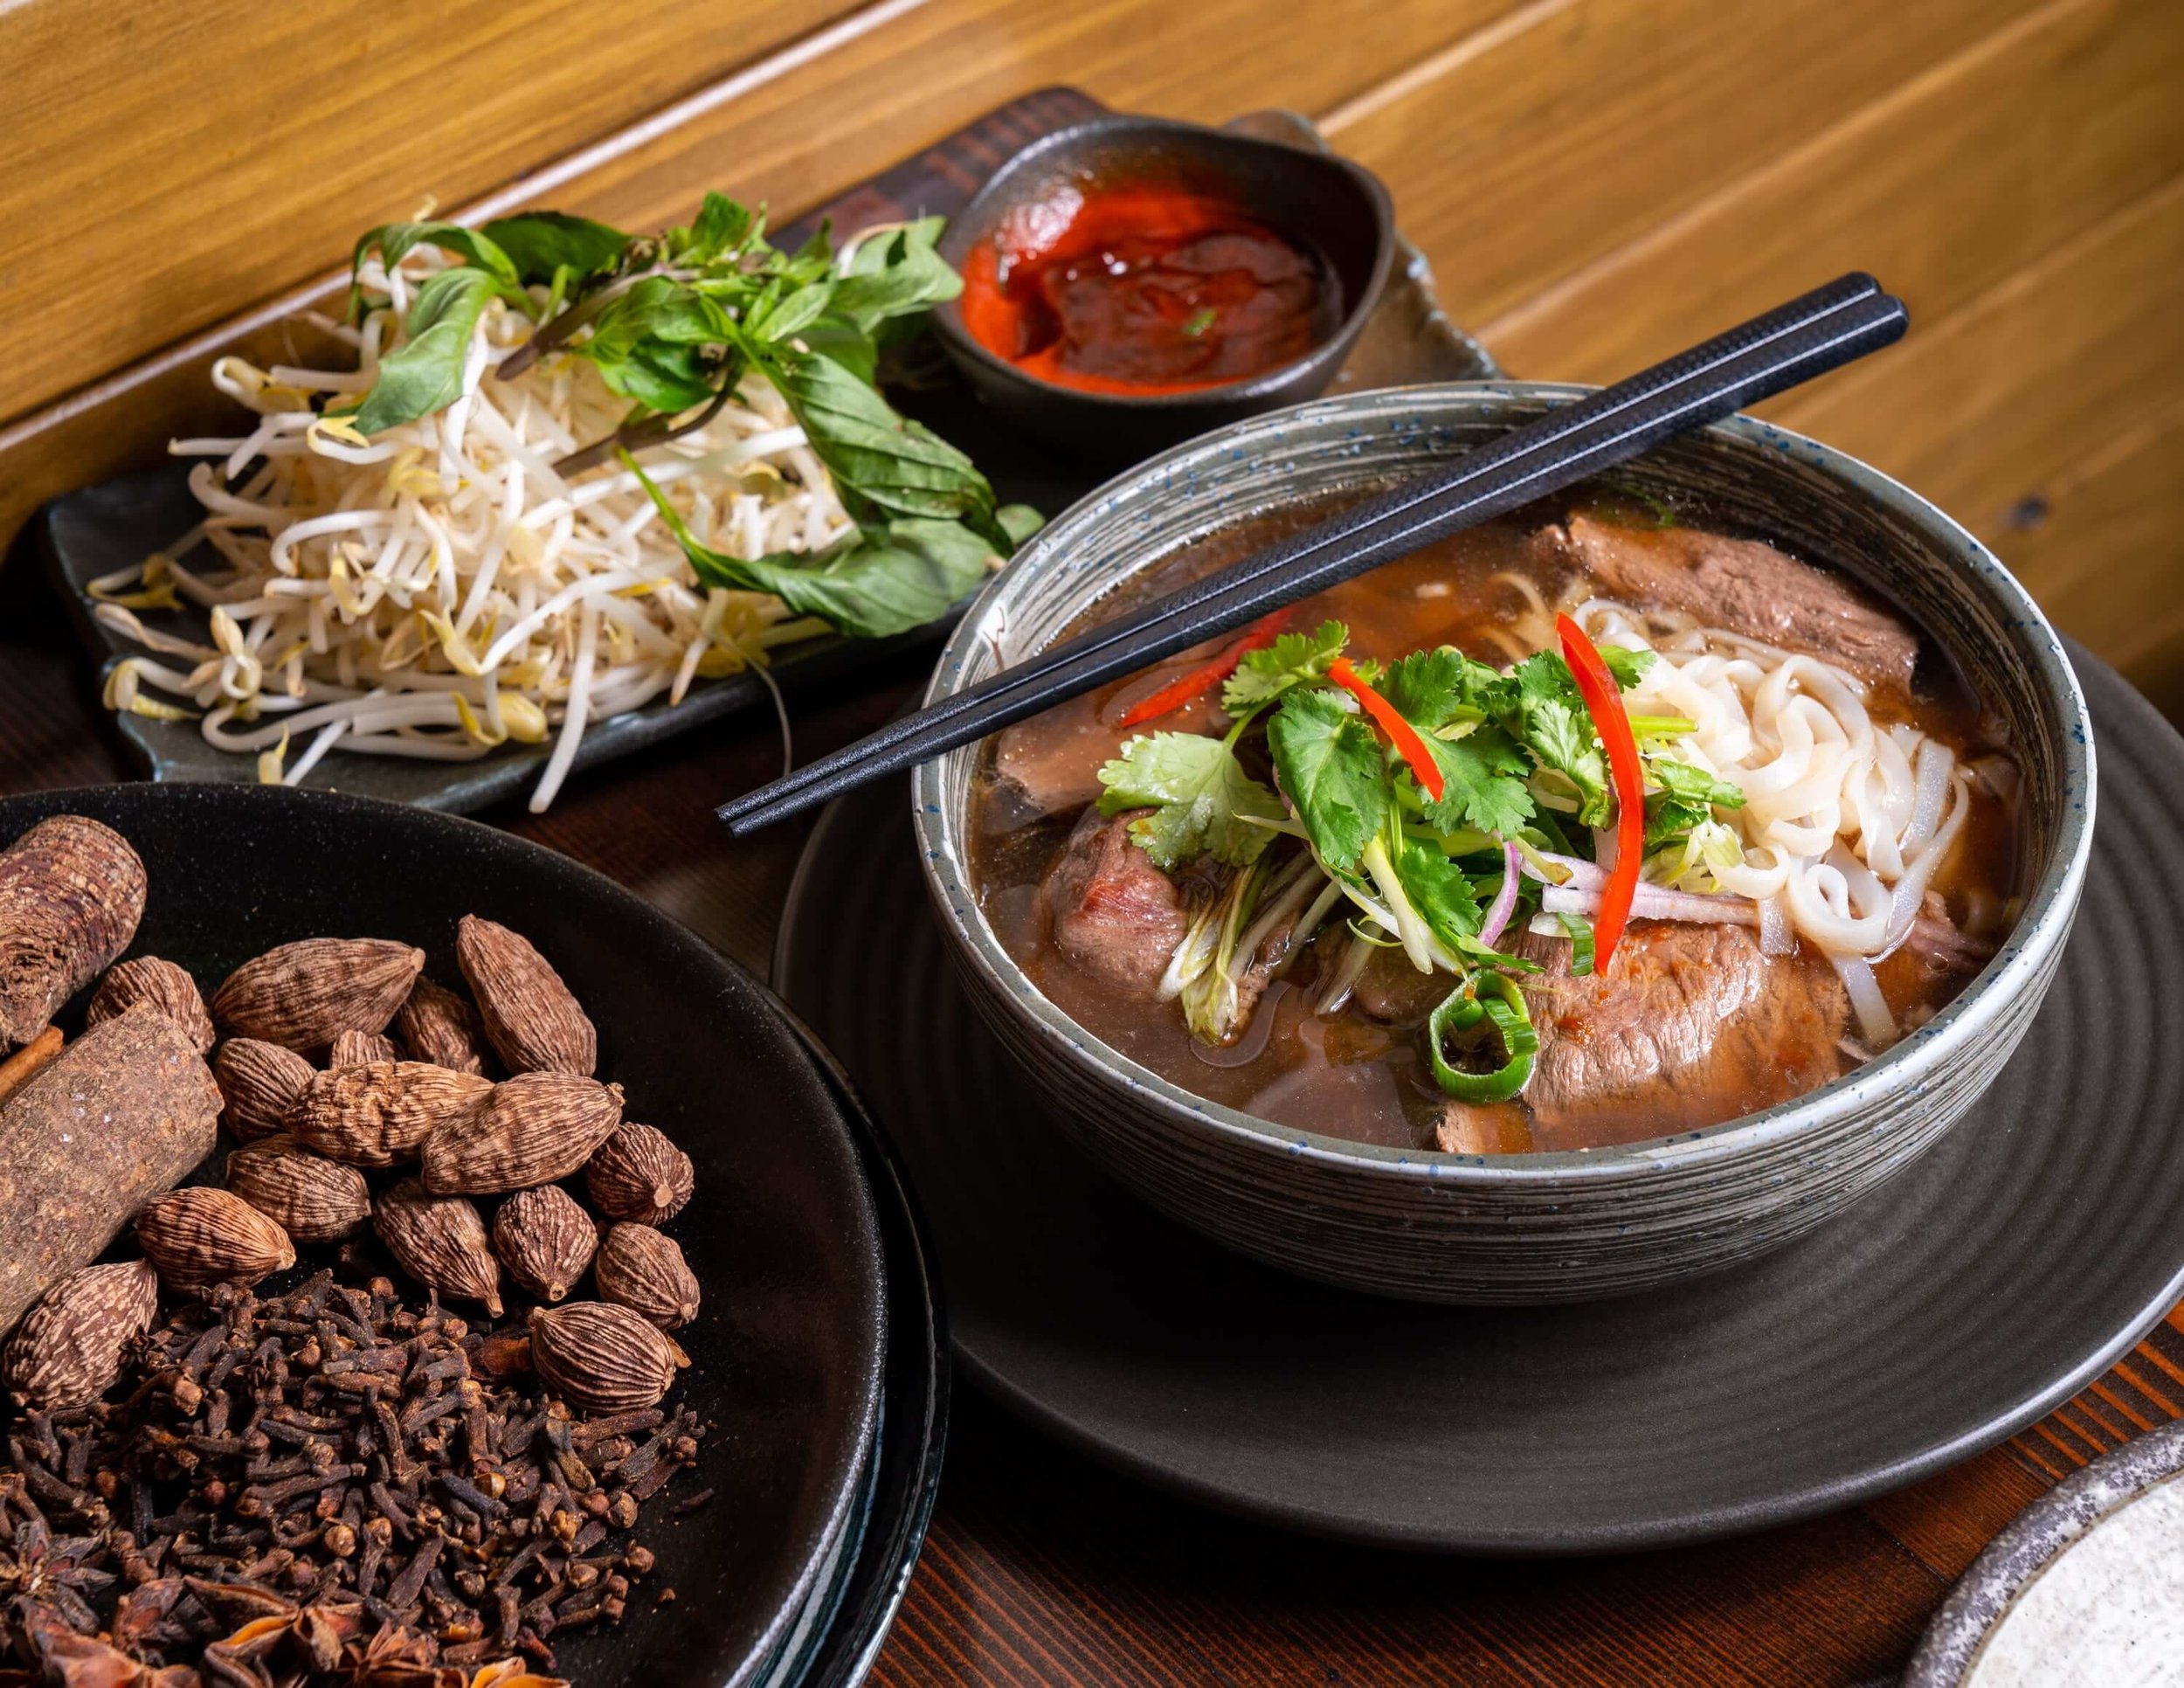  a beef soup with glass noodles and sides 